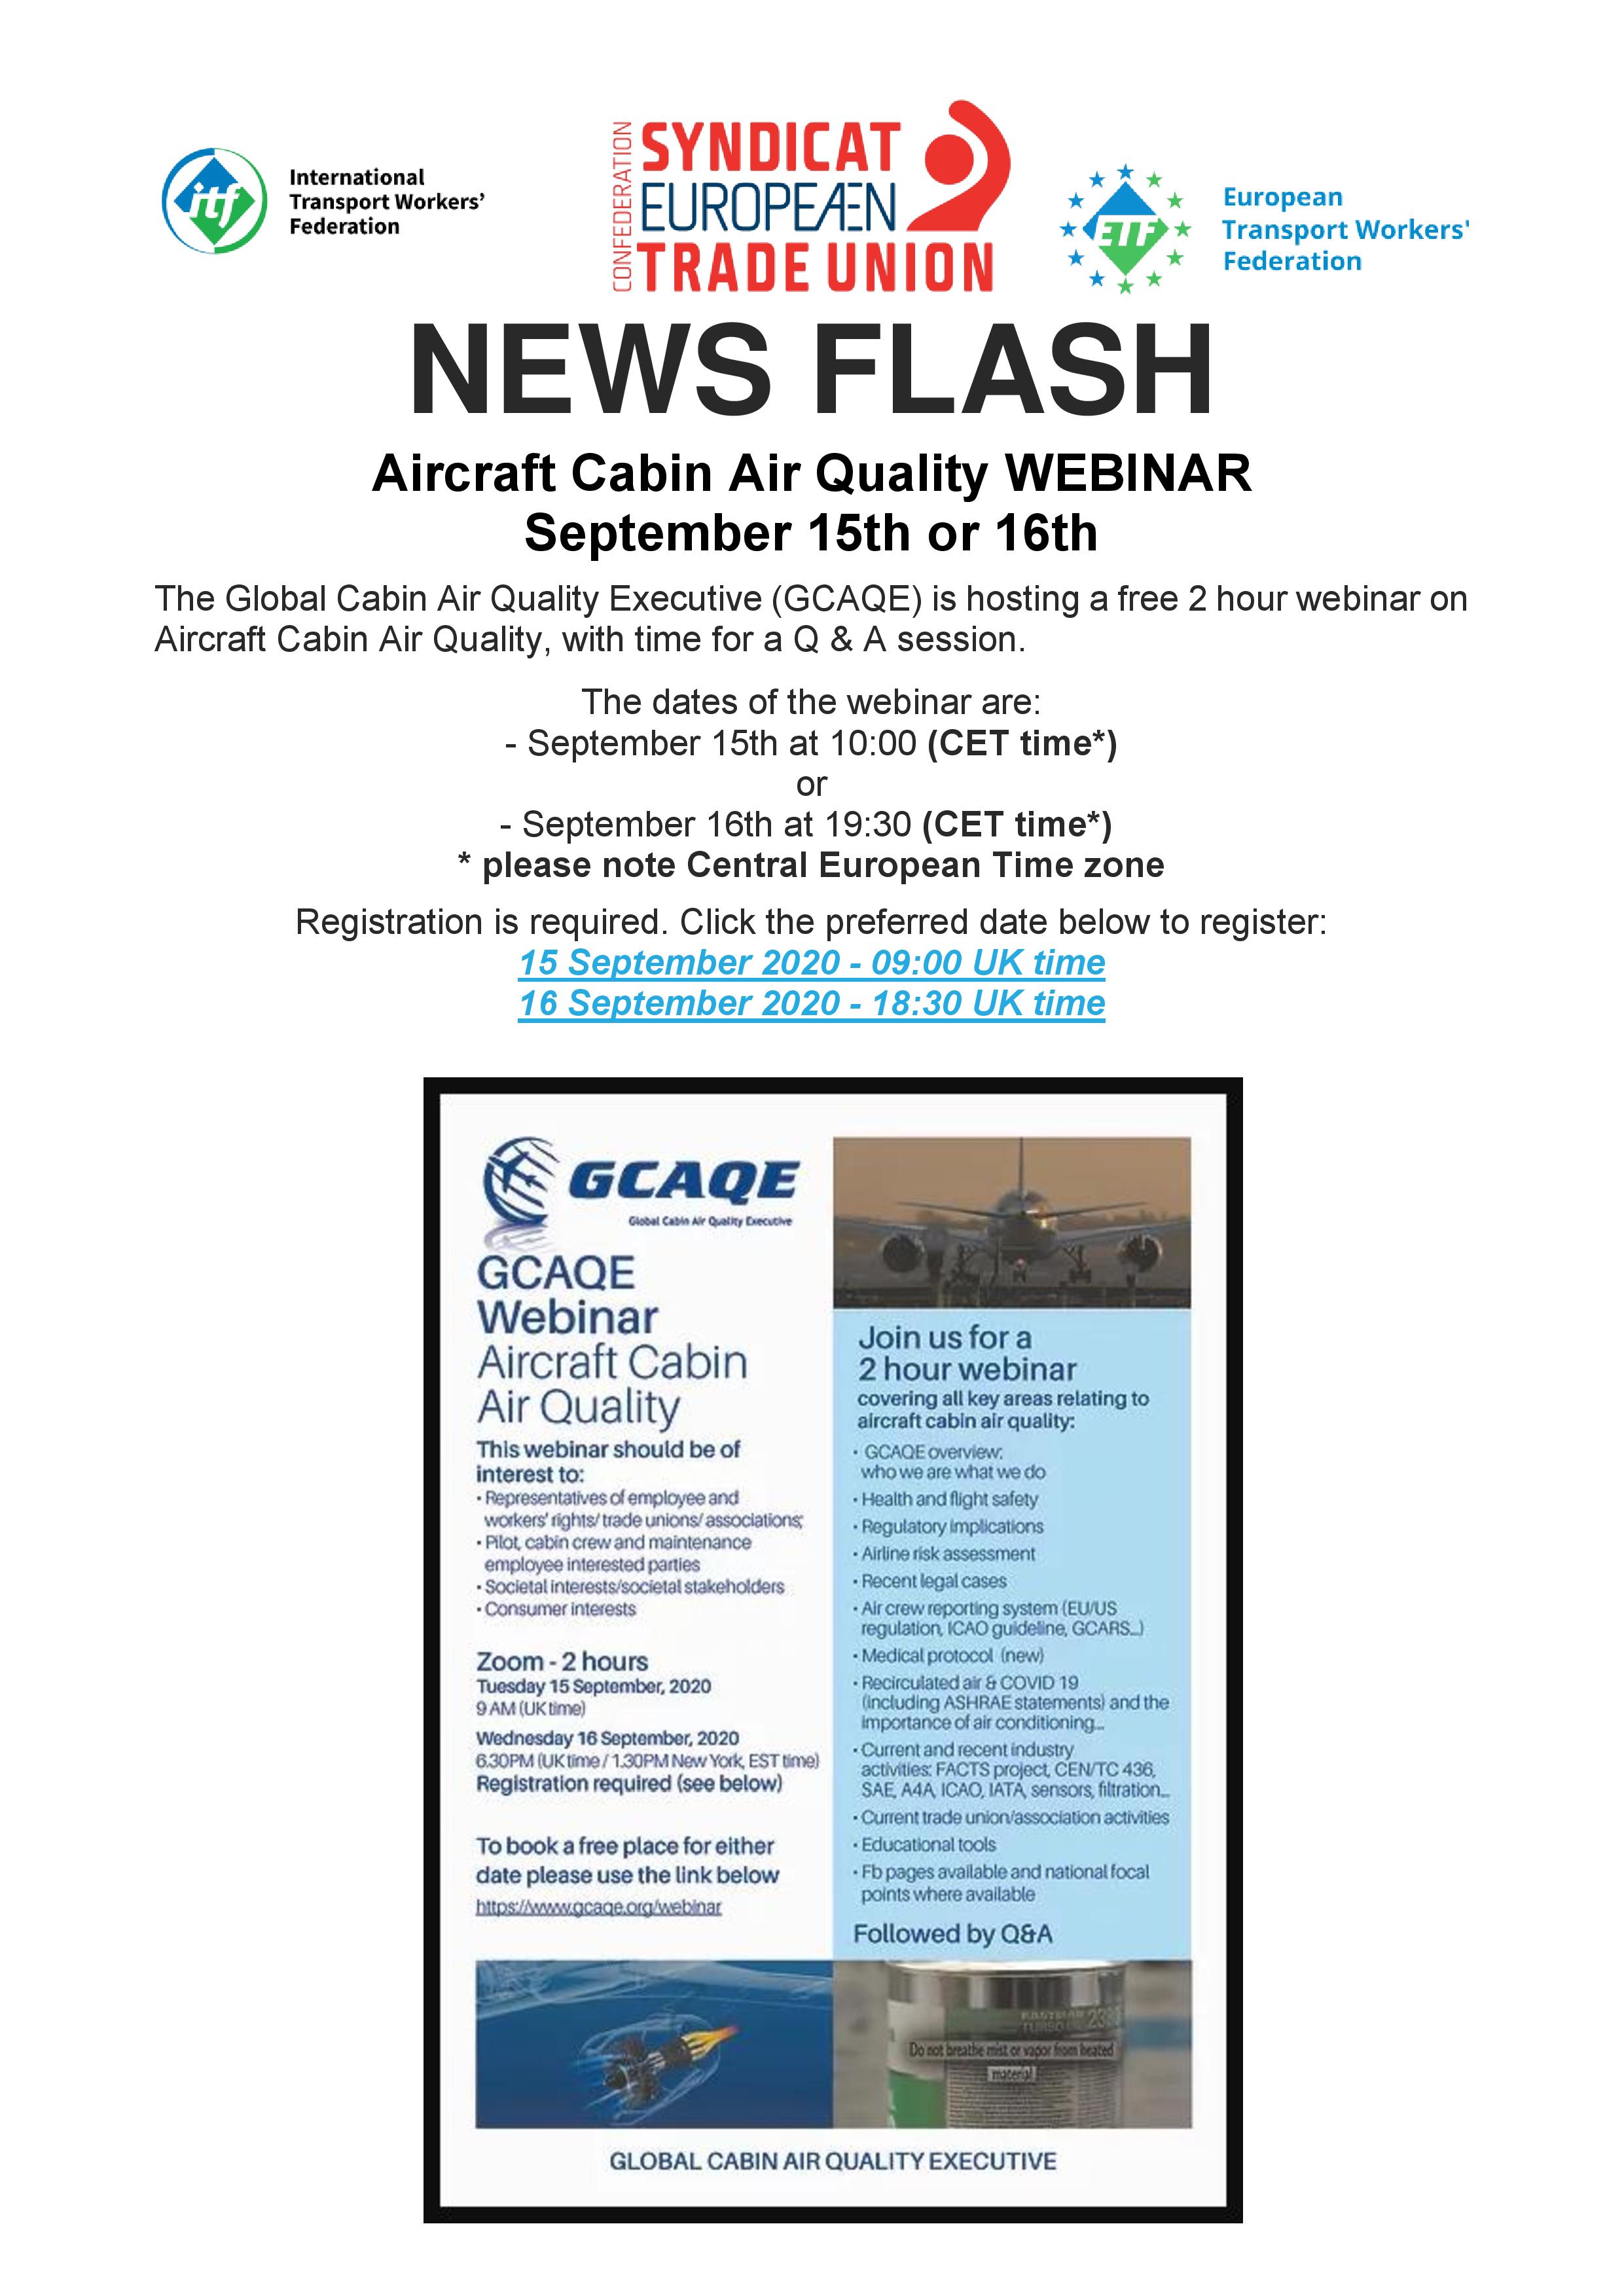 Flyer of the GCAQE Aircraft Cabin Air Quality webinar